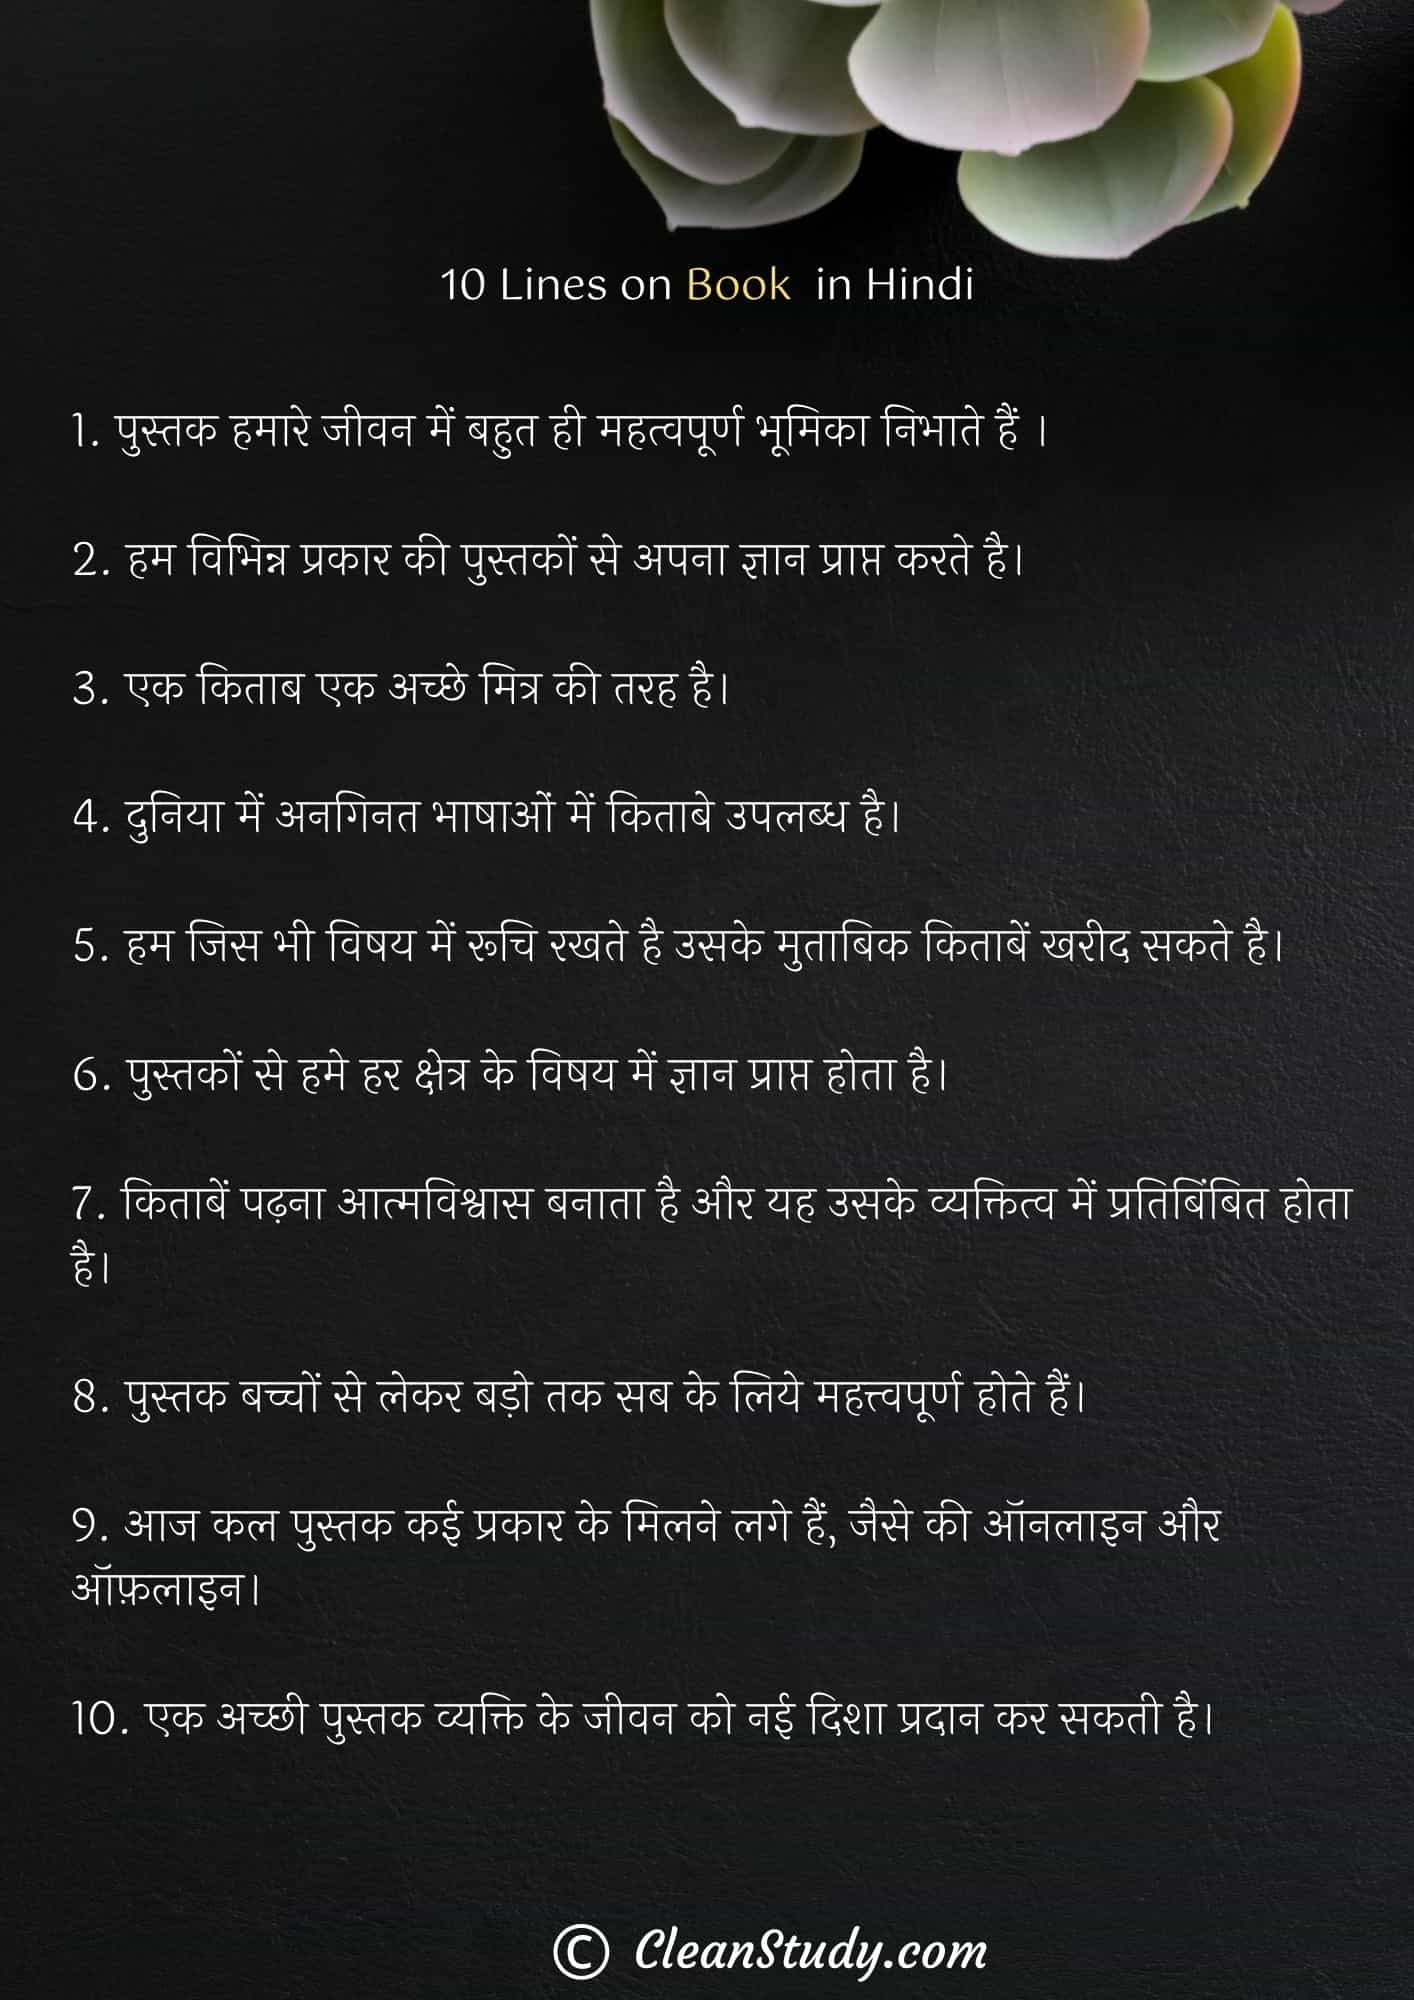 10 Lines on Books in Hindi